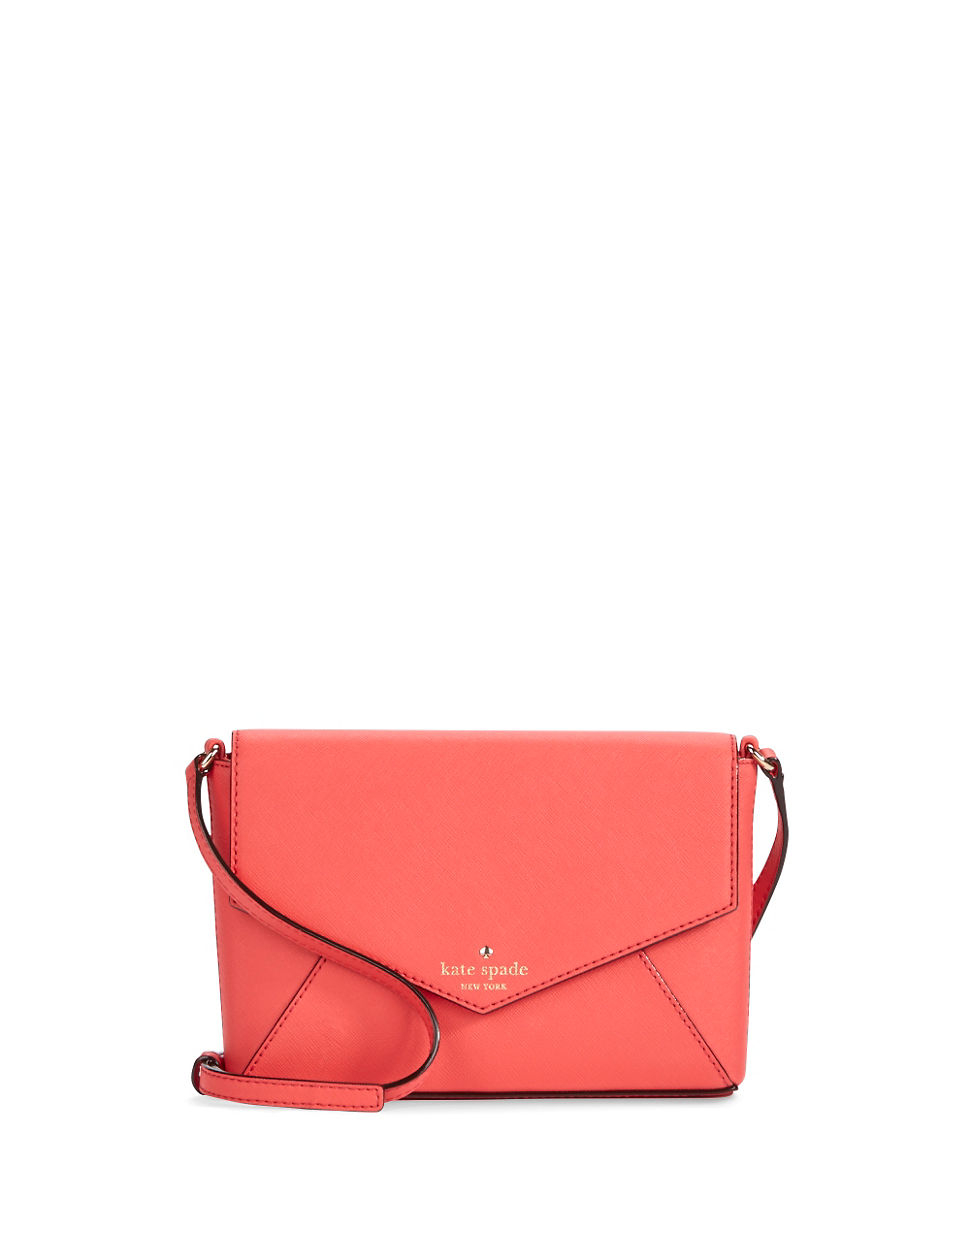 Kate spade Monday Large Leather Crossbody Bag in Red (Geranium) | Lyst